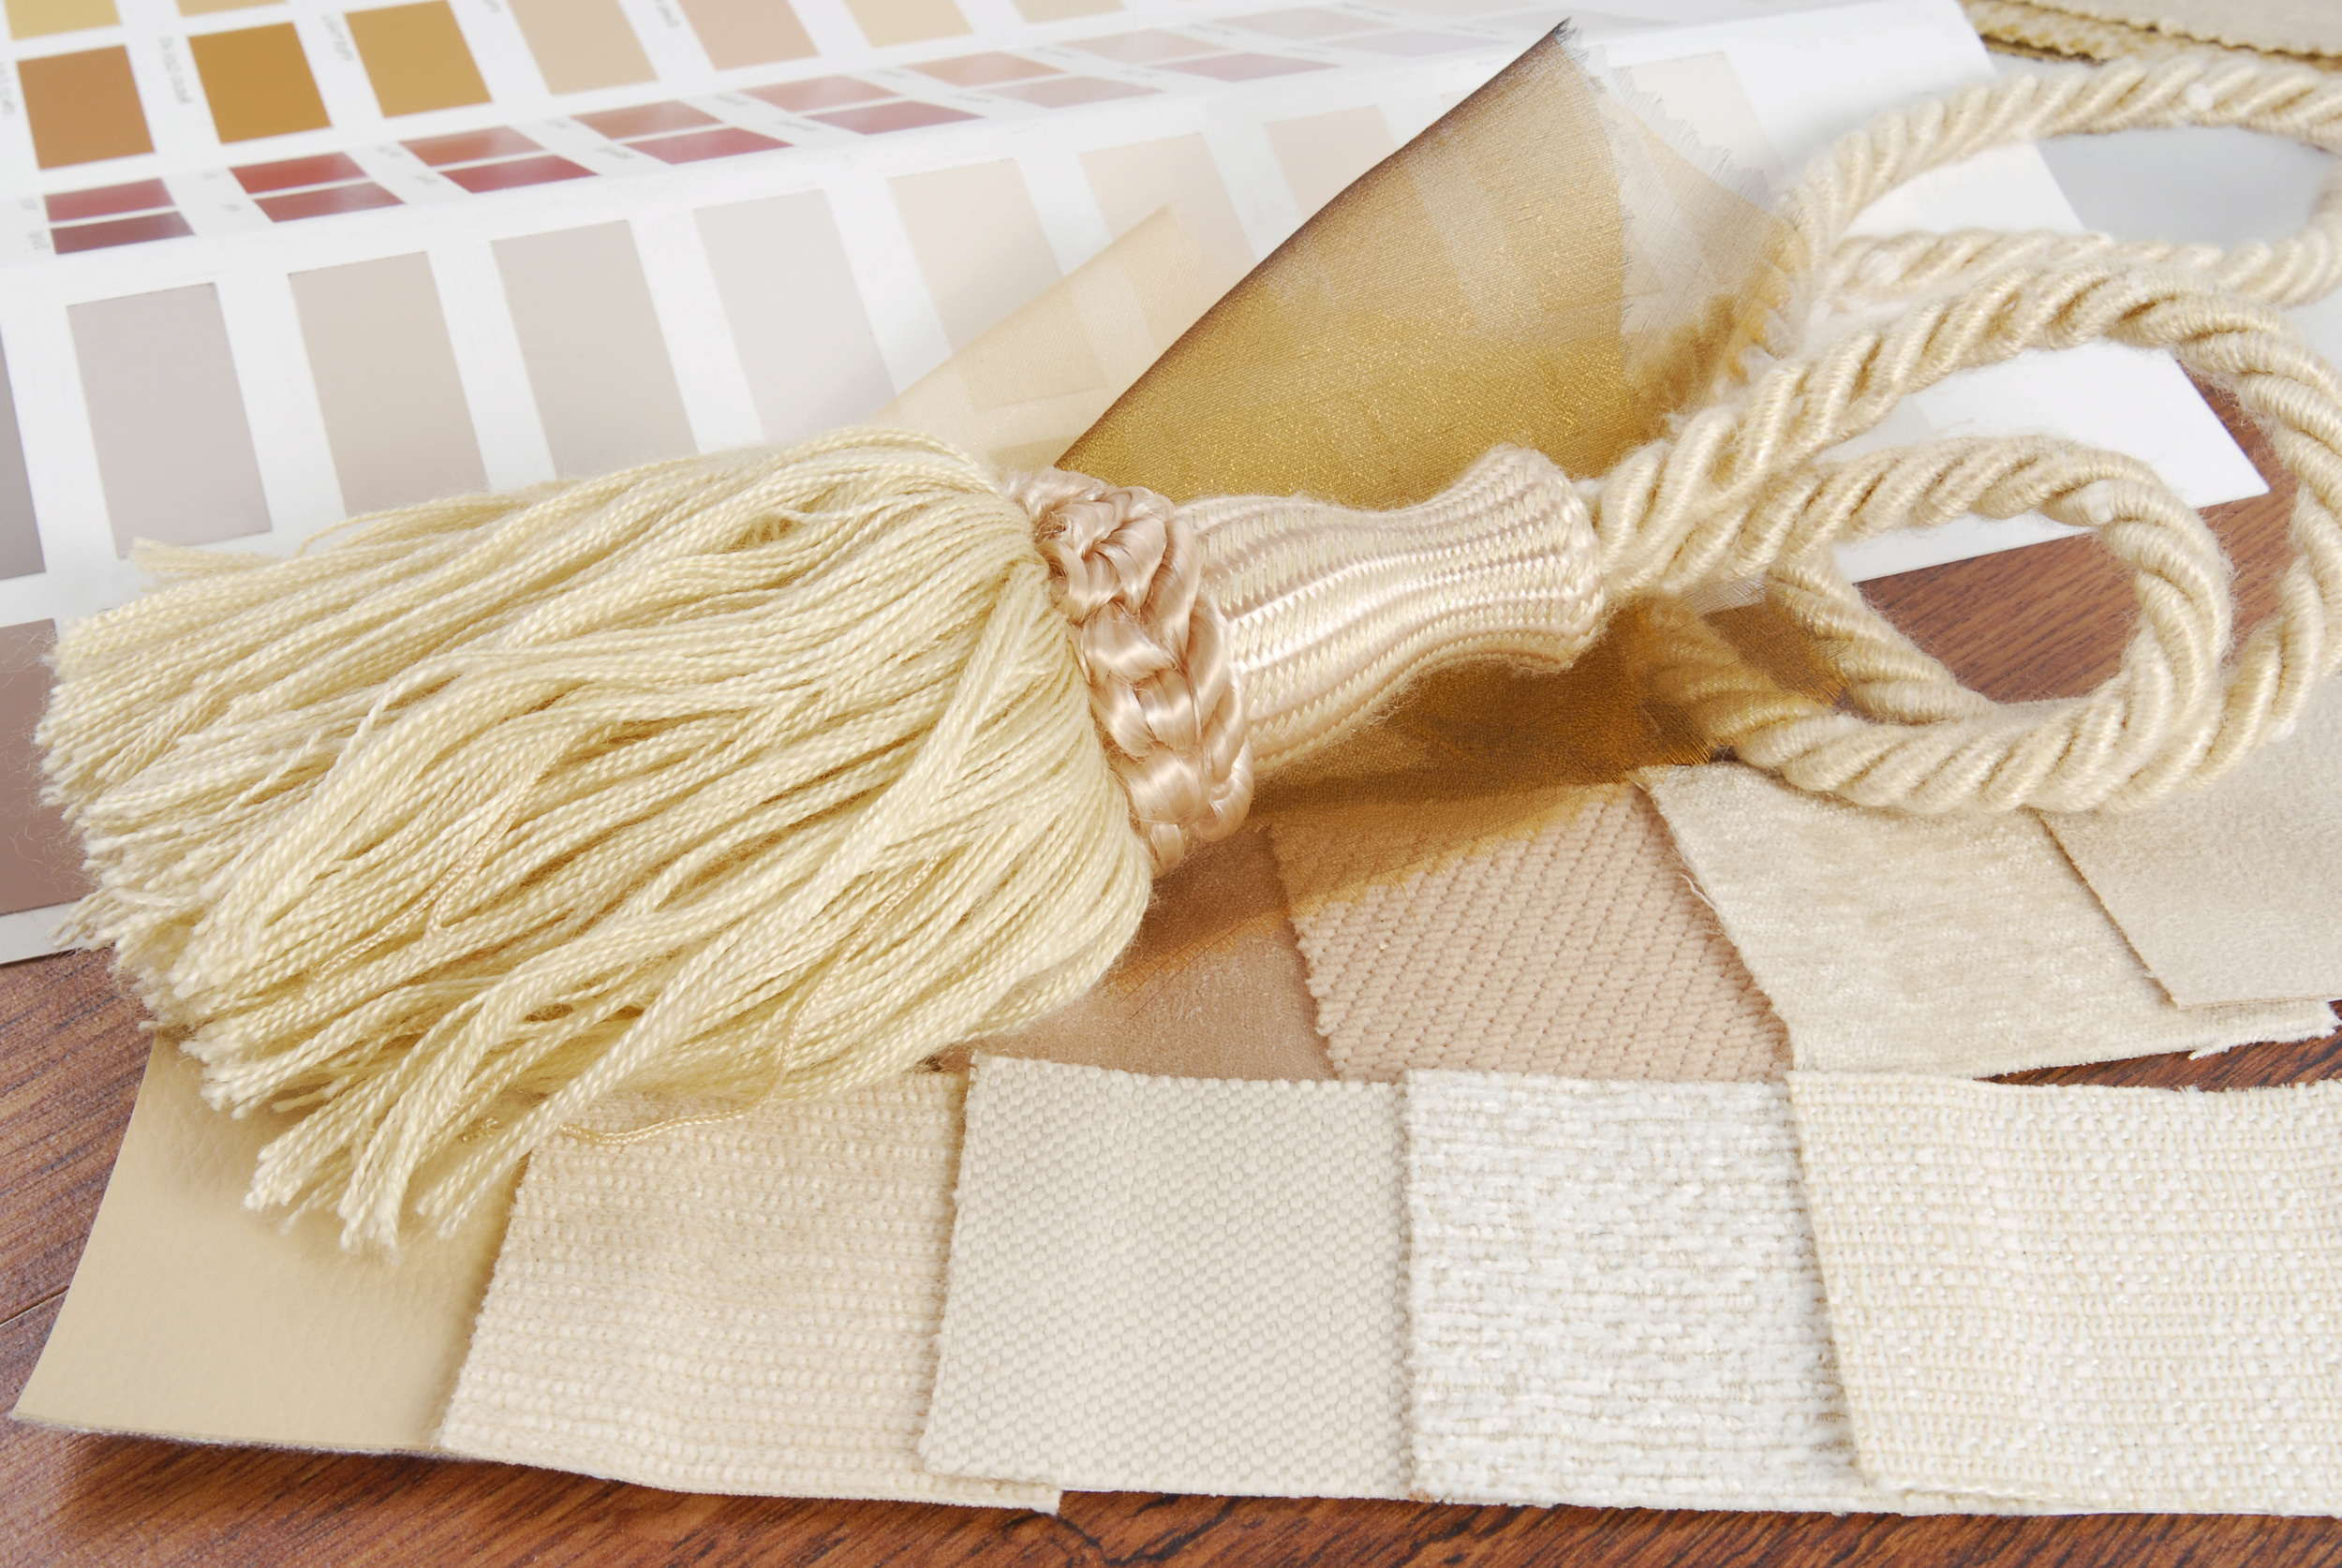 Cream Tassel with Varied Textures of Fabric Swatches and Warm Paint Chips